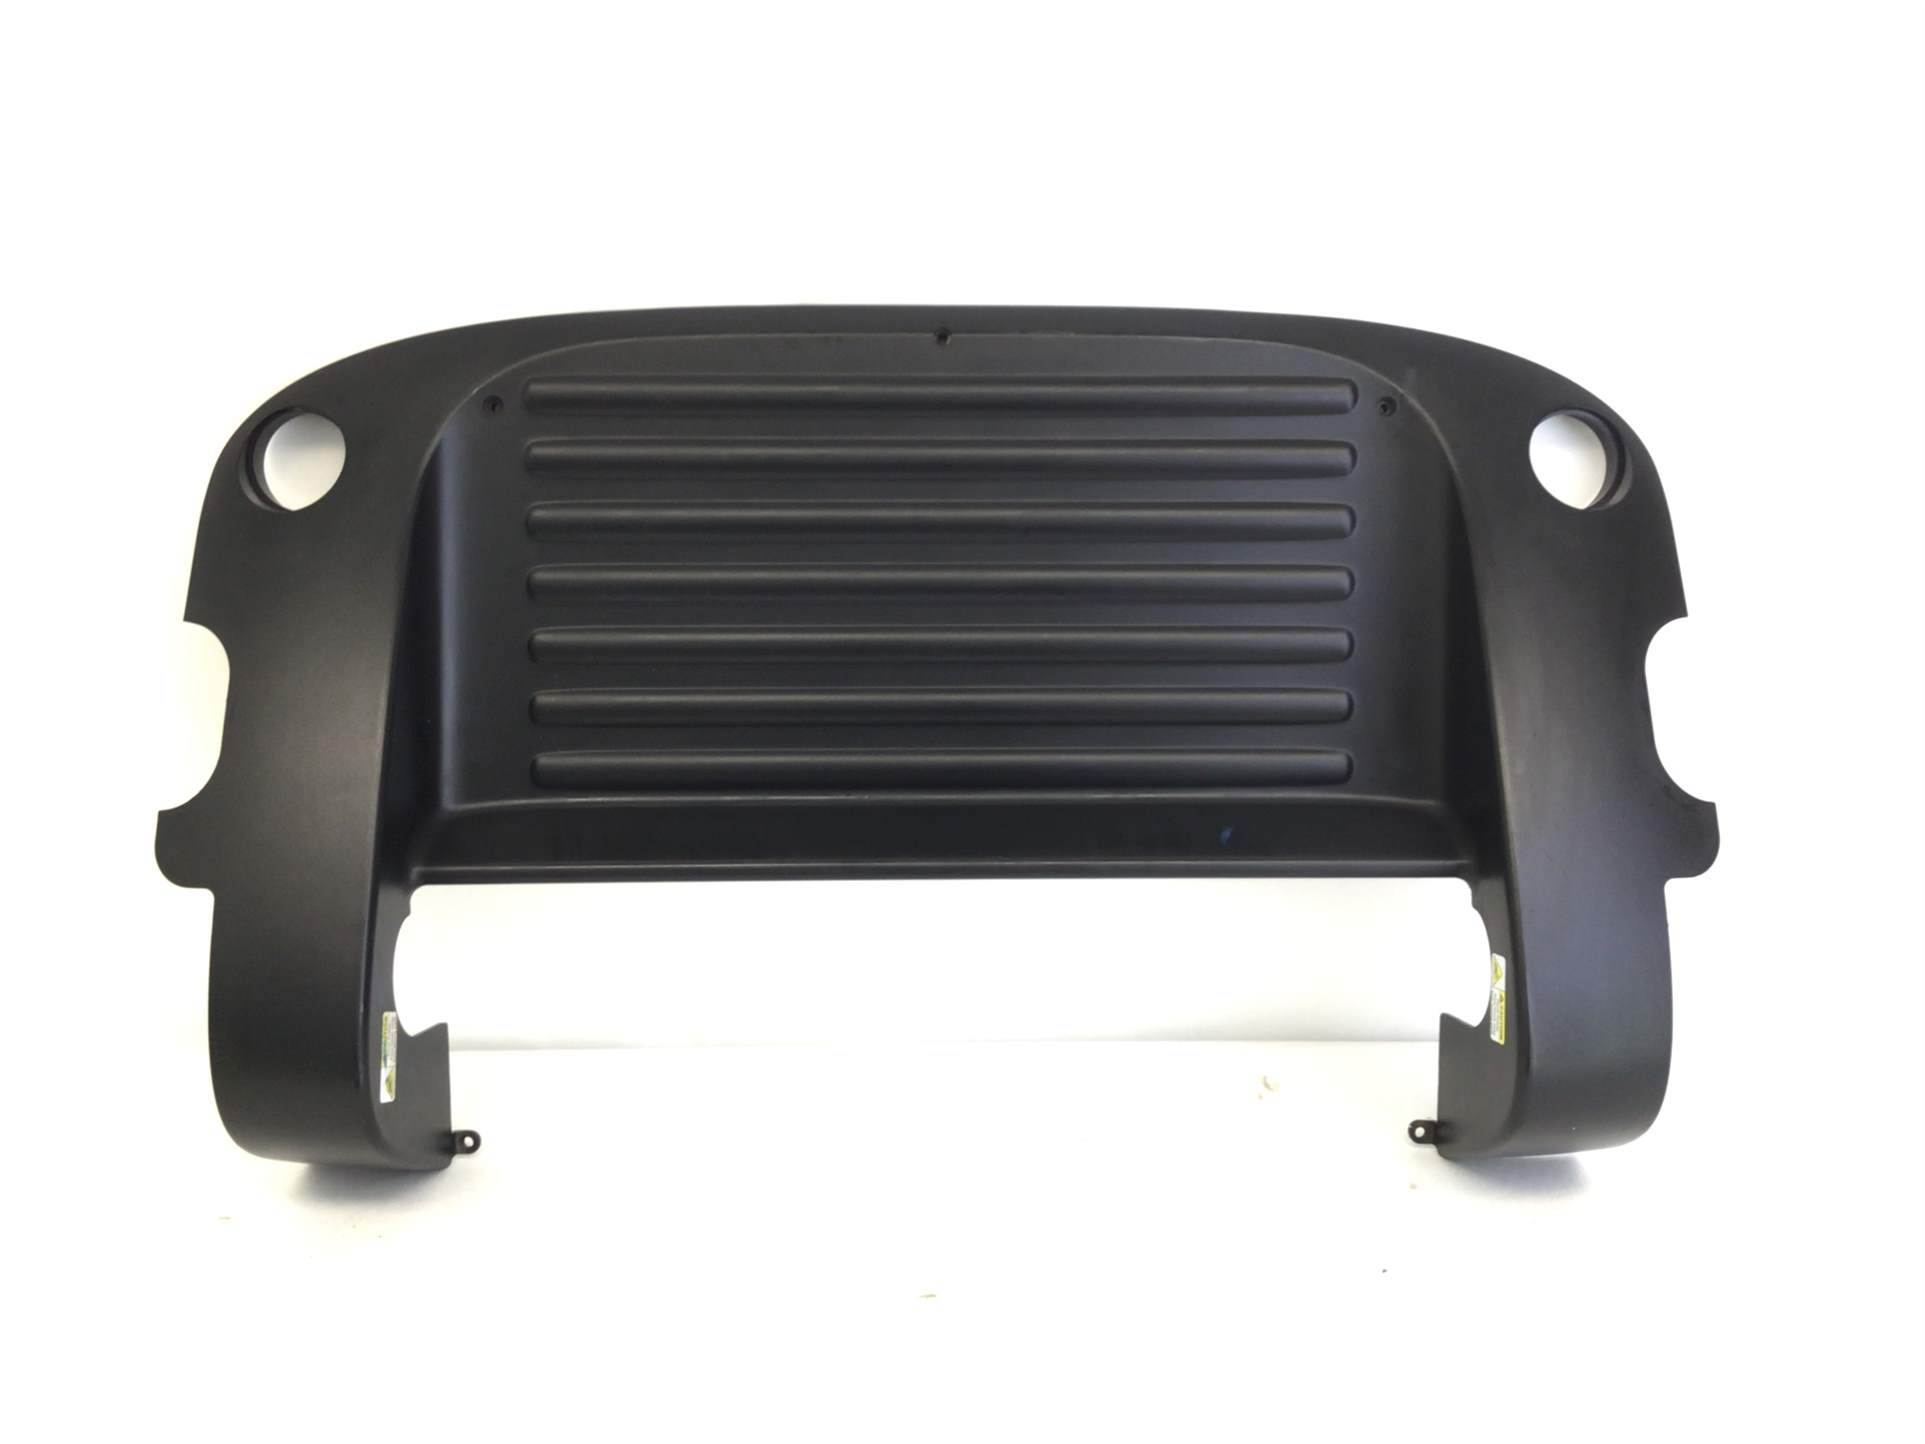 Rear Motor Cover (Used)